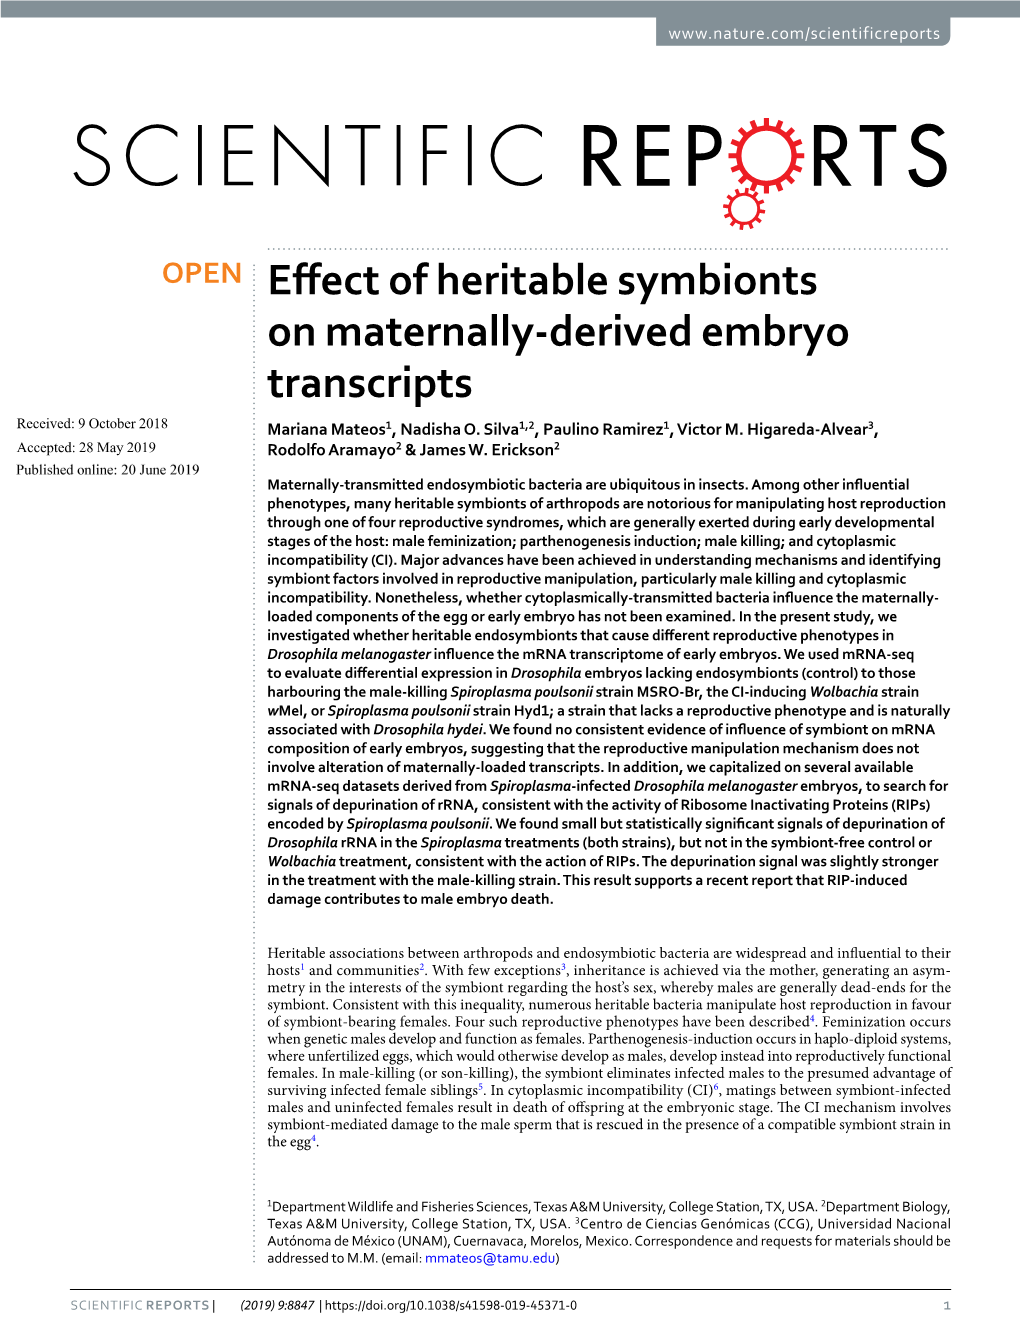 Effect of Heritable Symbionts on Maternally-Derived Embryo Transcripts